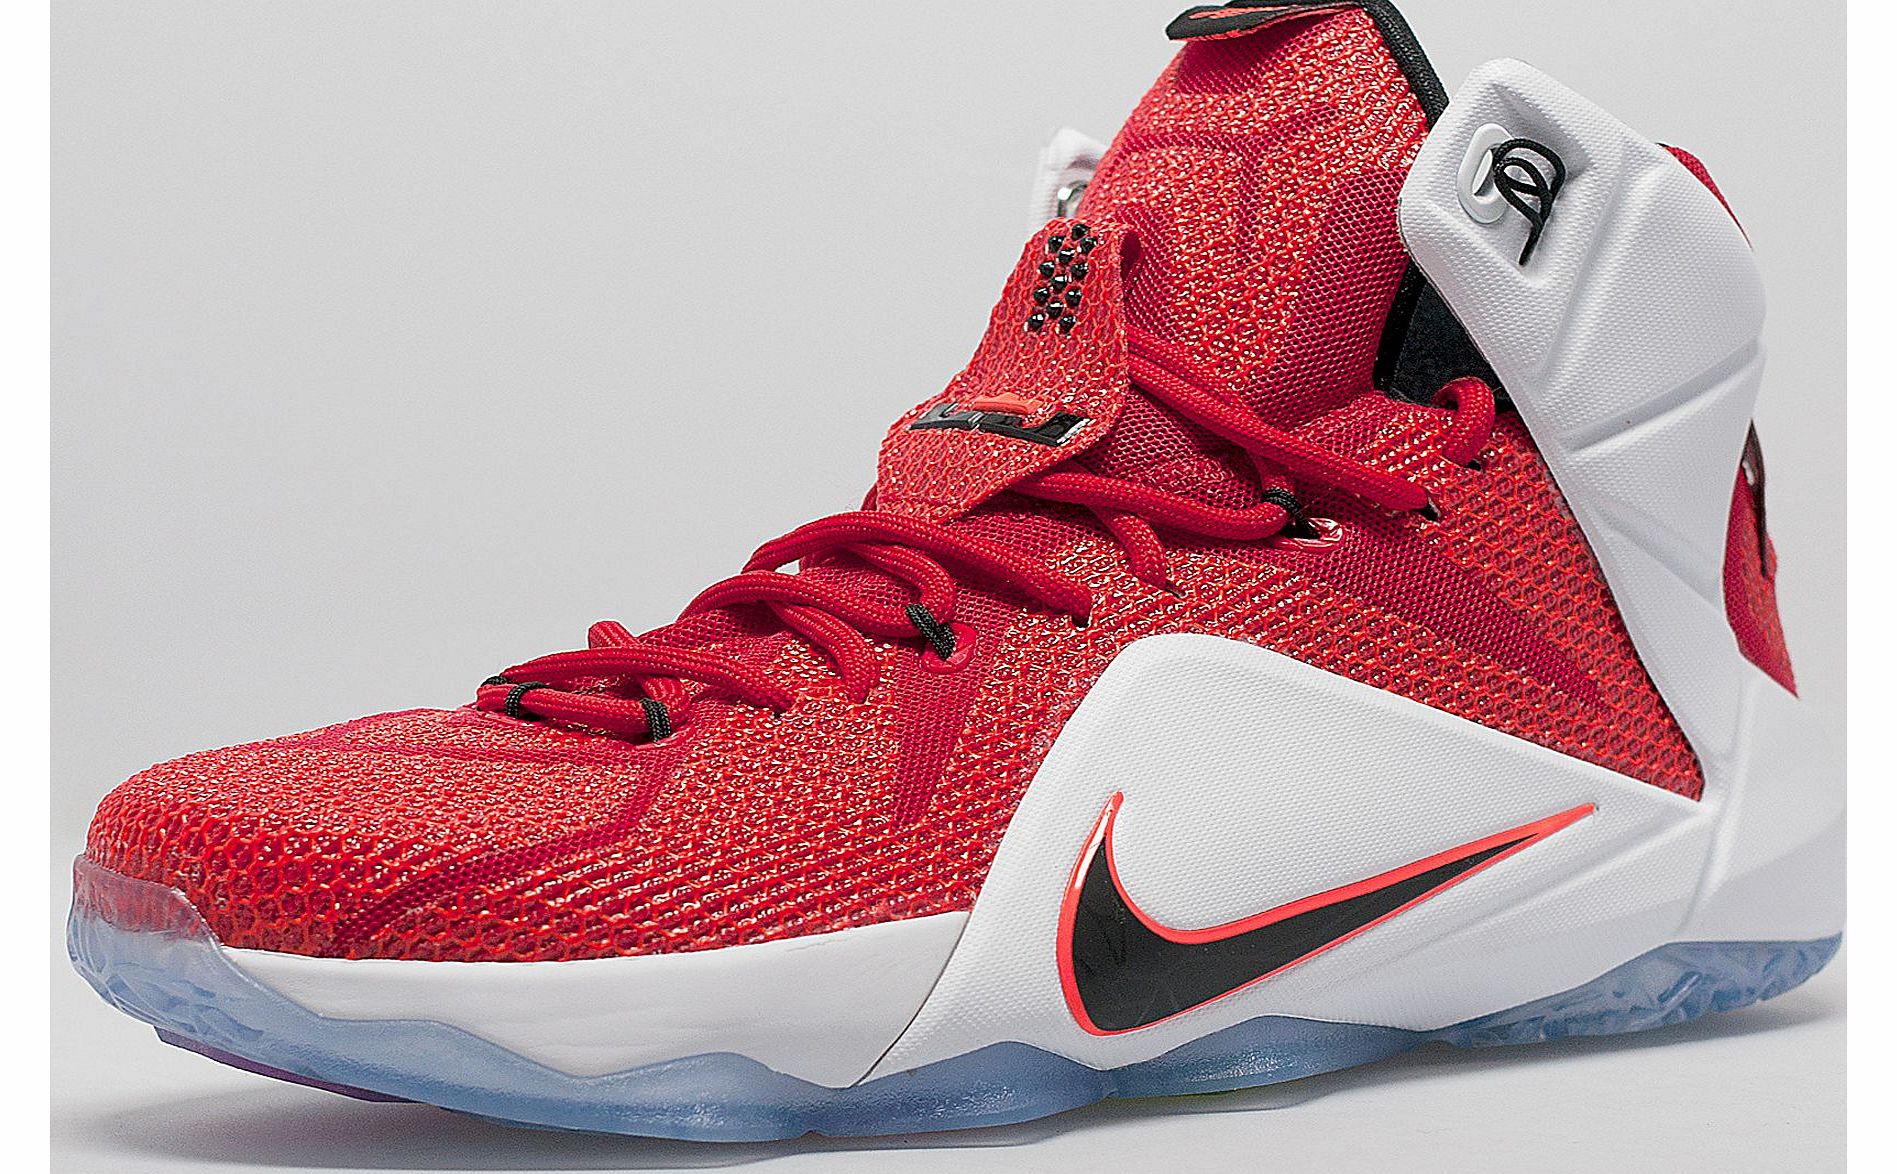 Nike LeBron XII Heart of the Lion